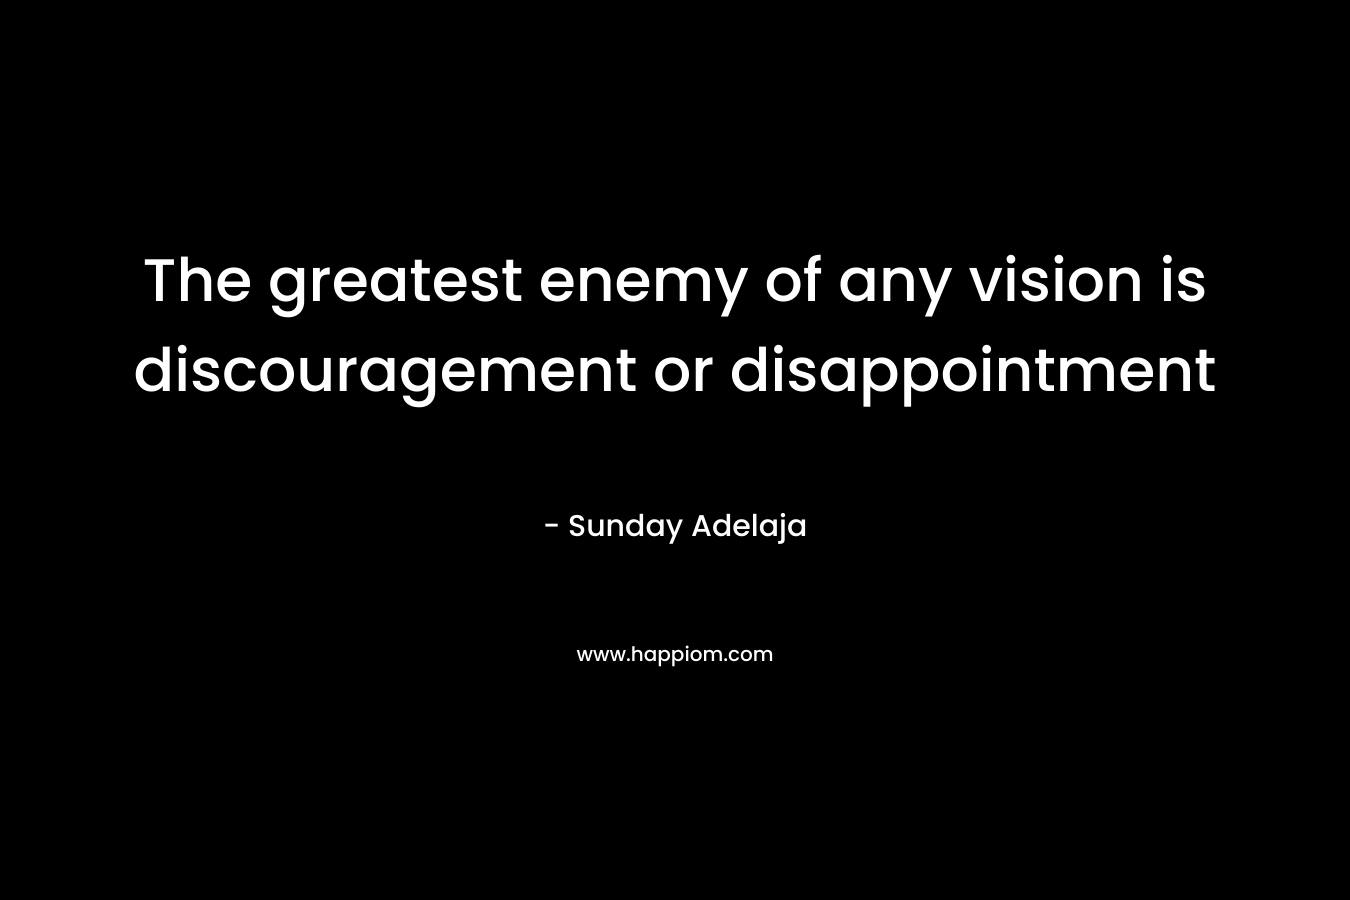 The greatest enemy of any vision is discouragement or disappointment